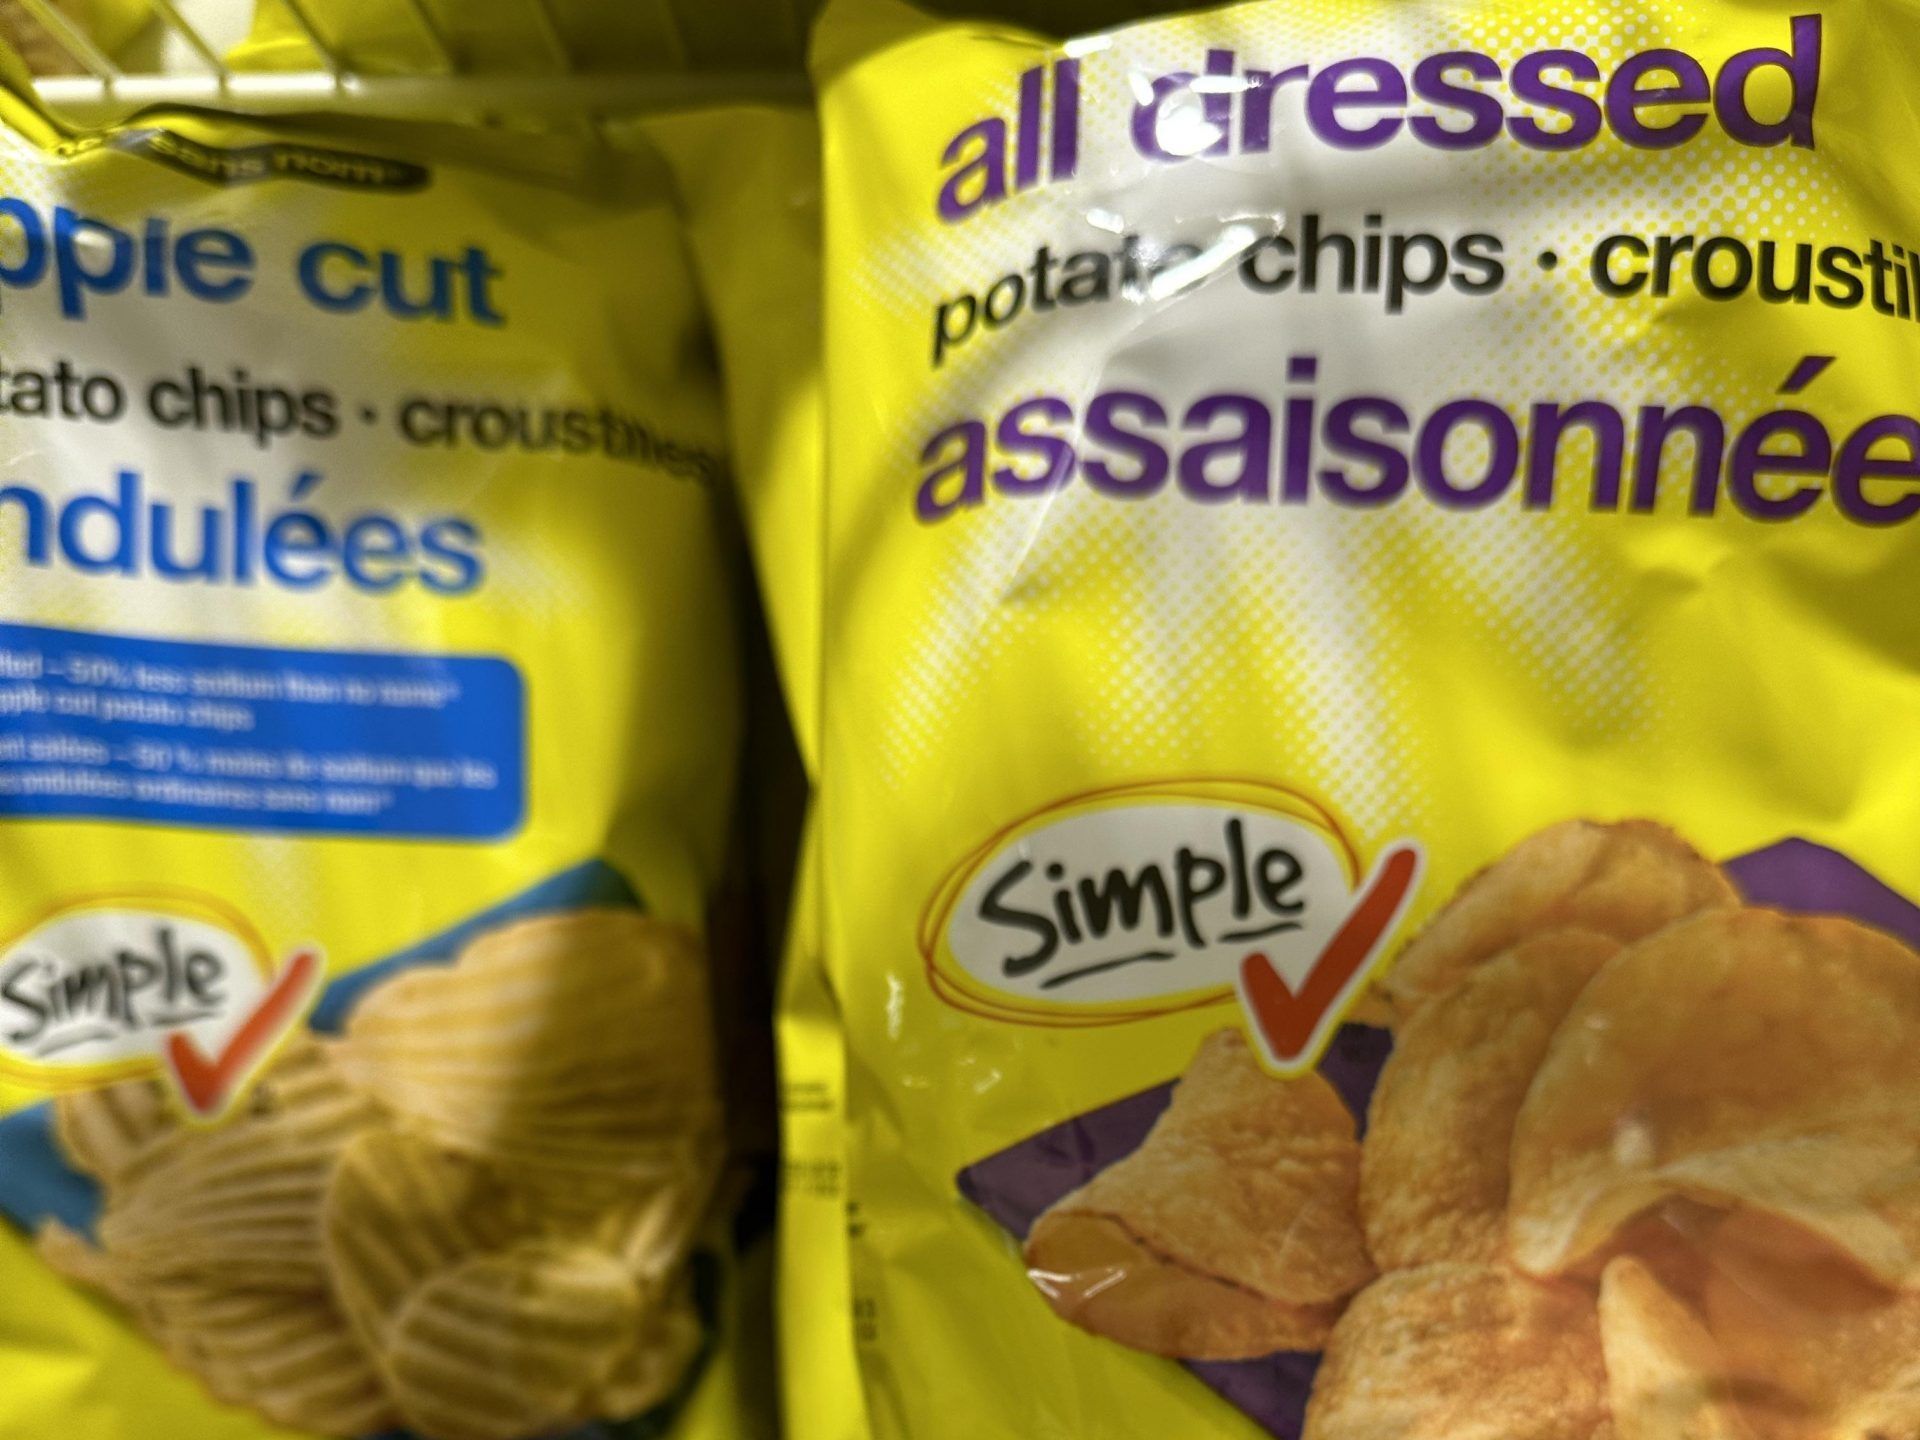 SNACK ATTACK: Toronto shoppers complain about price of chips